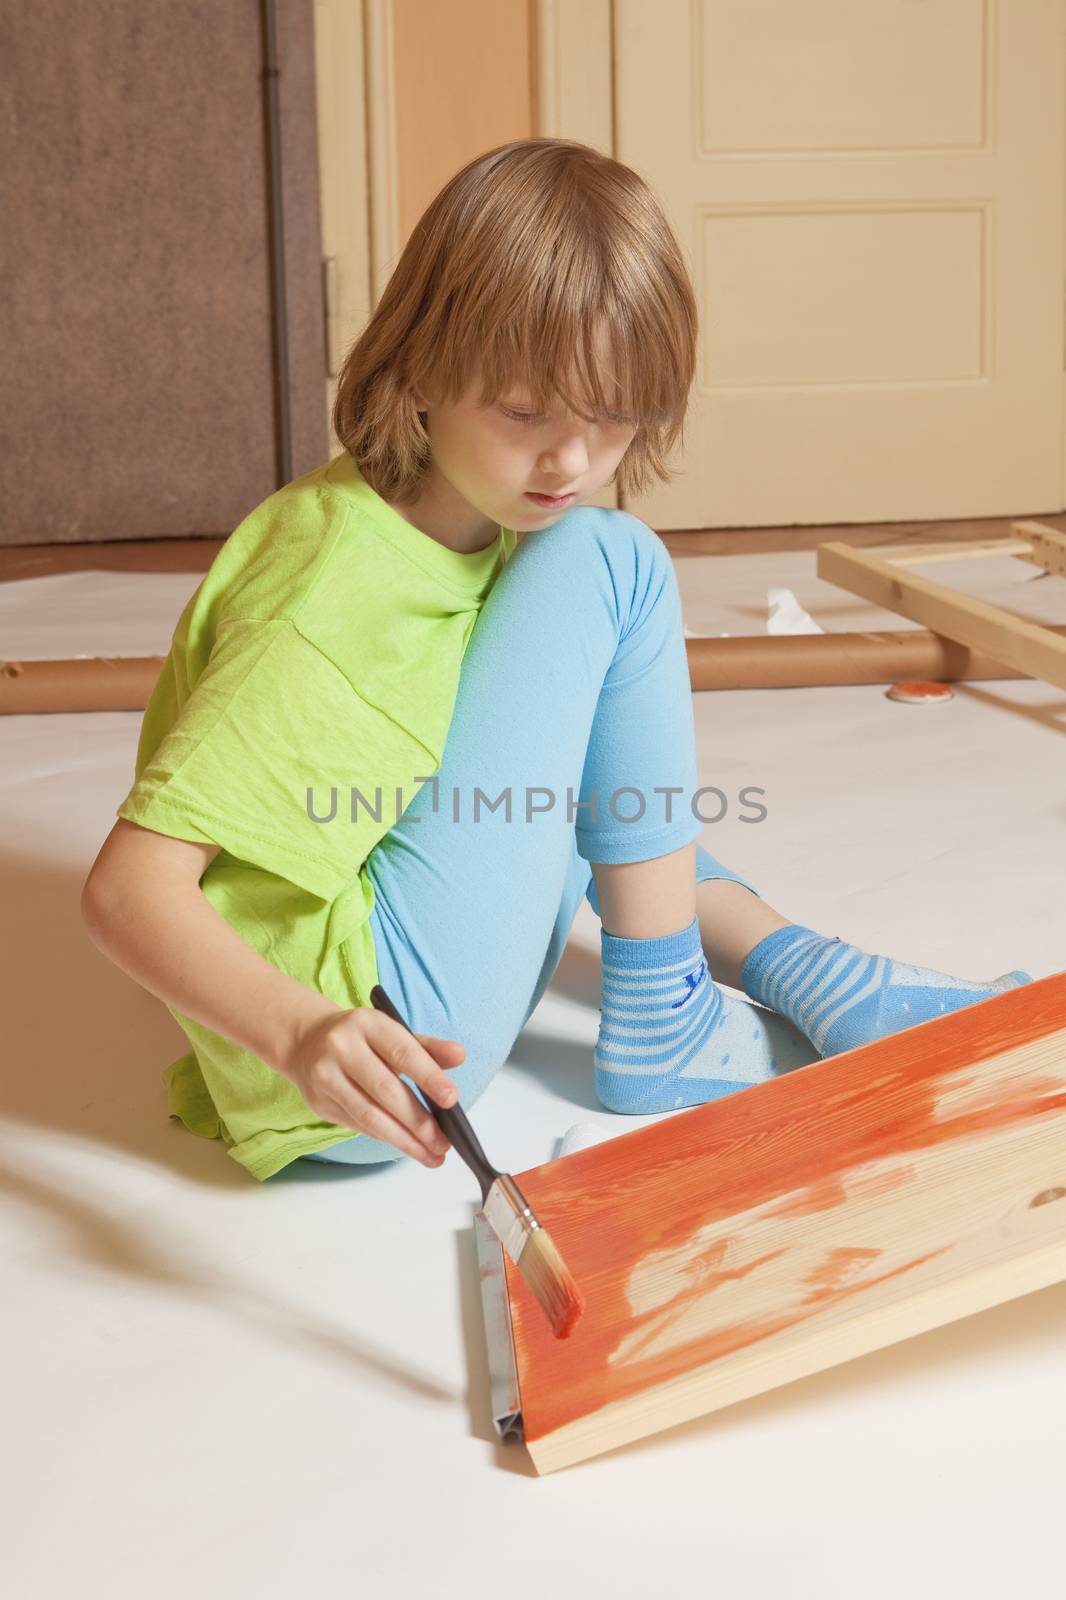 Boy with Blond Hair Painting a Board by courtyardpix